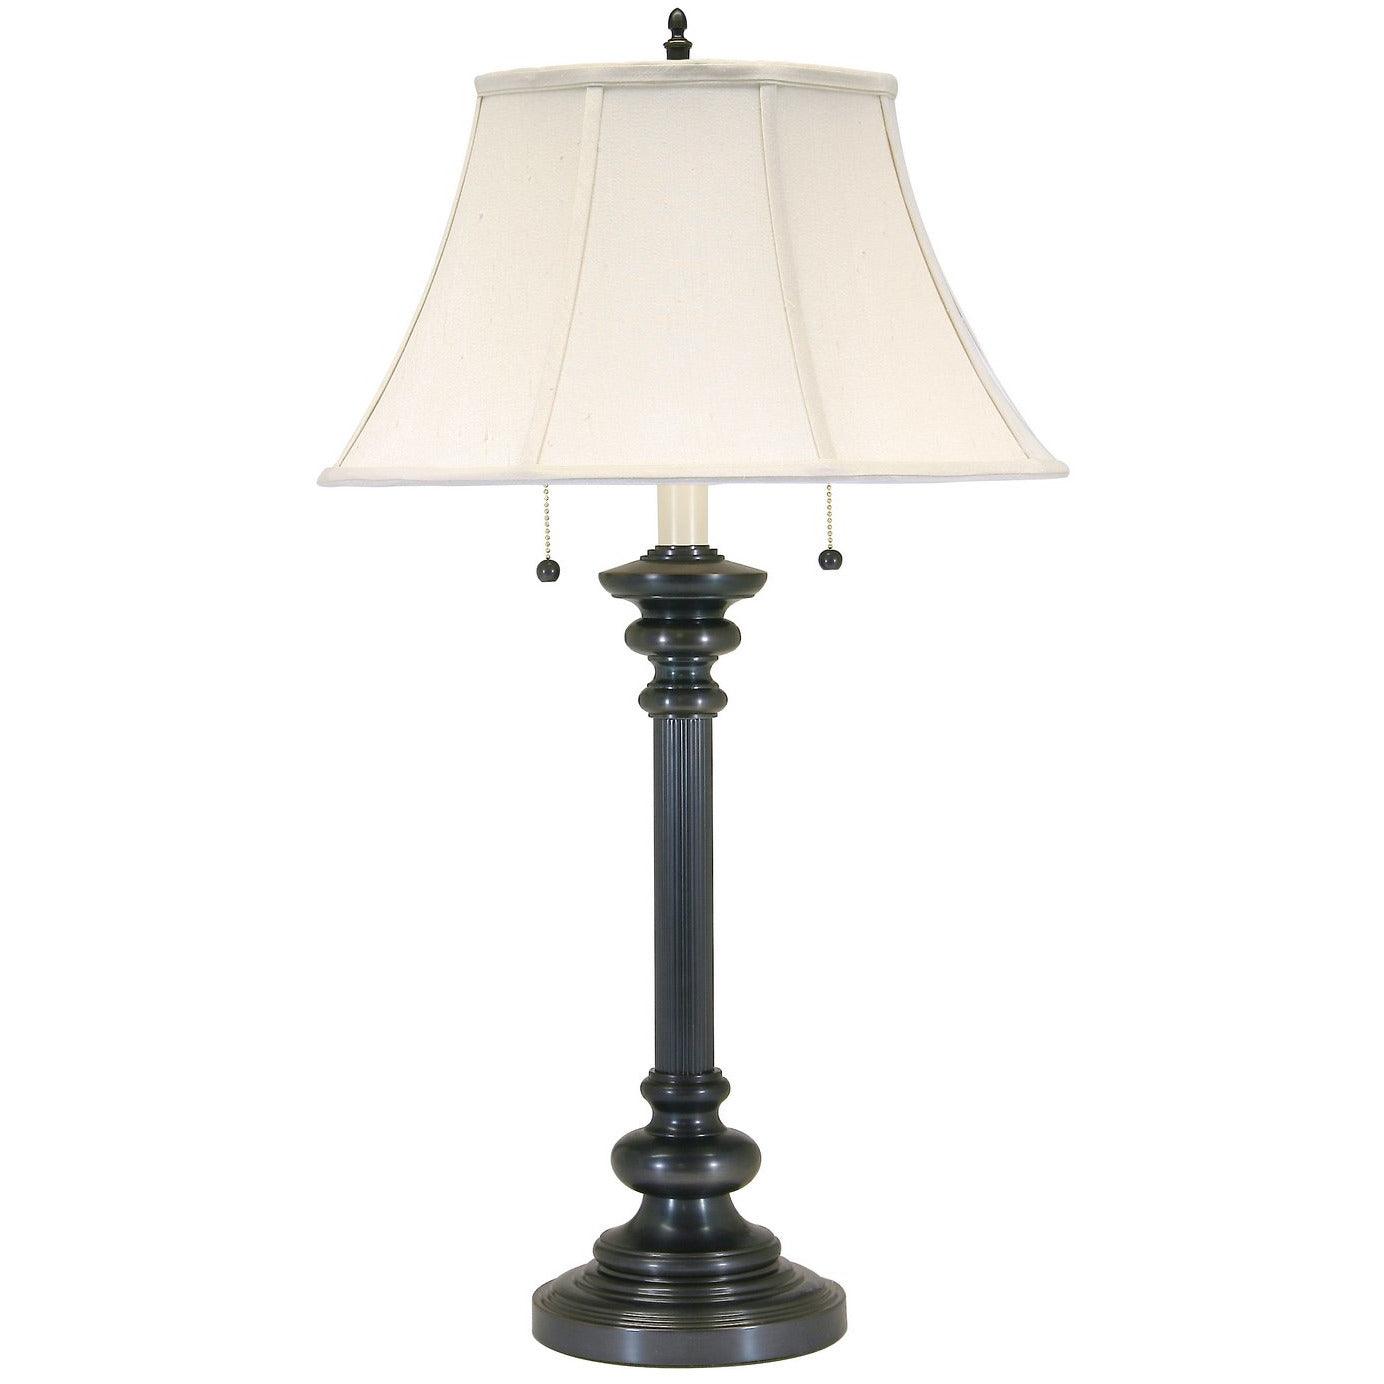 House of Troy - Newport Two Light Table Lamp - N651-OB | Montreal Lighting & Hardware